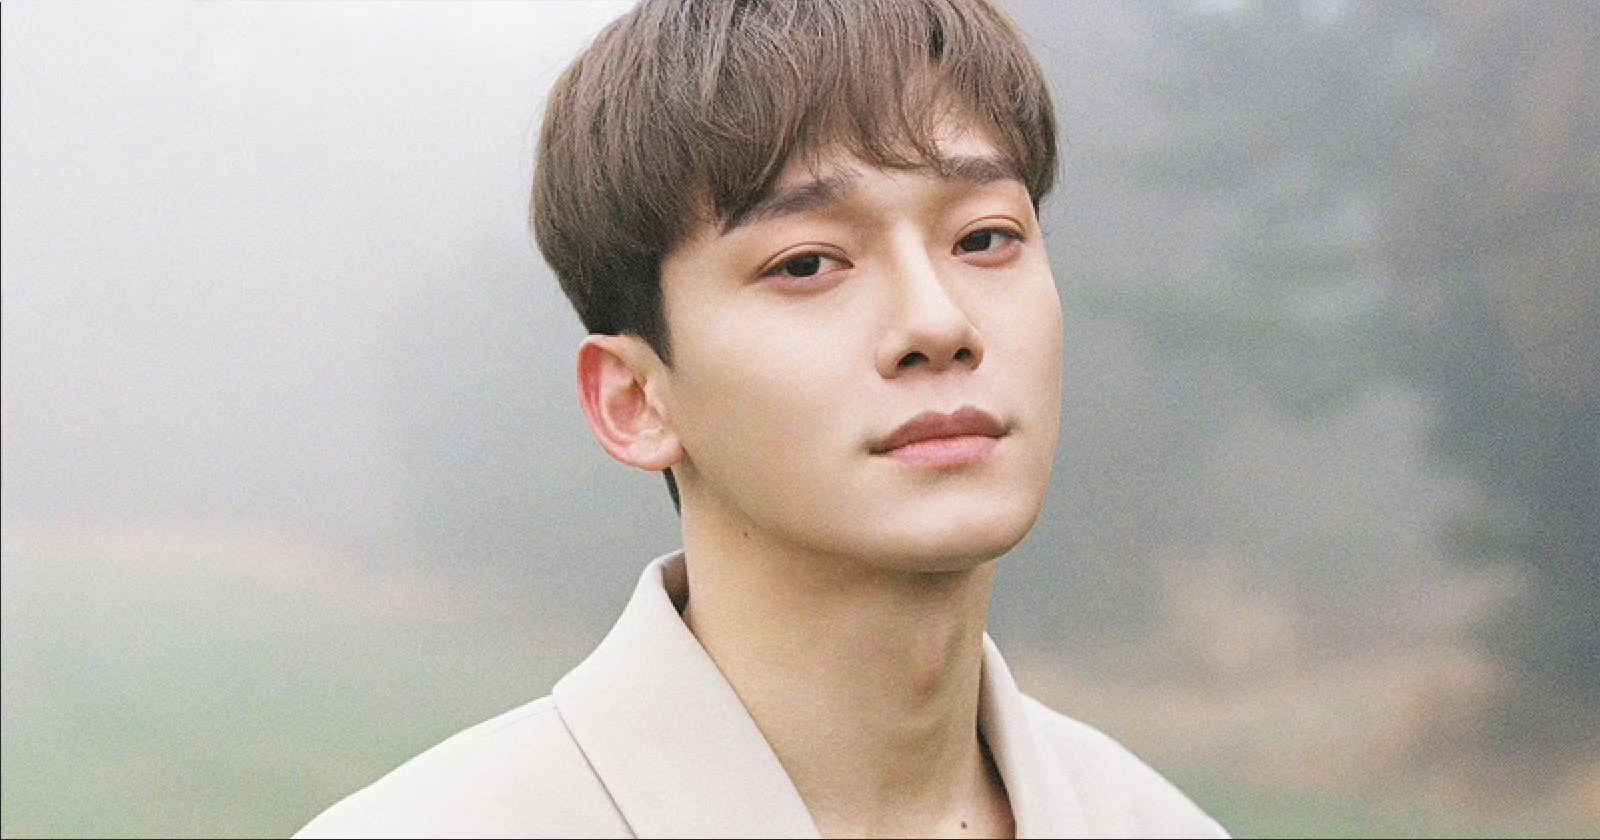 Netizens and fans react to the news of Chen and his wife expecting their second child